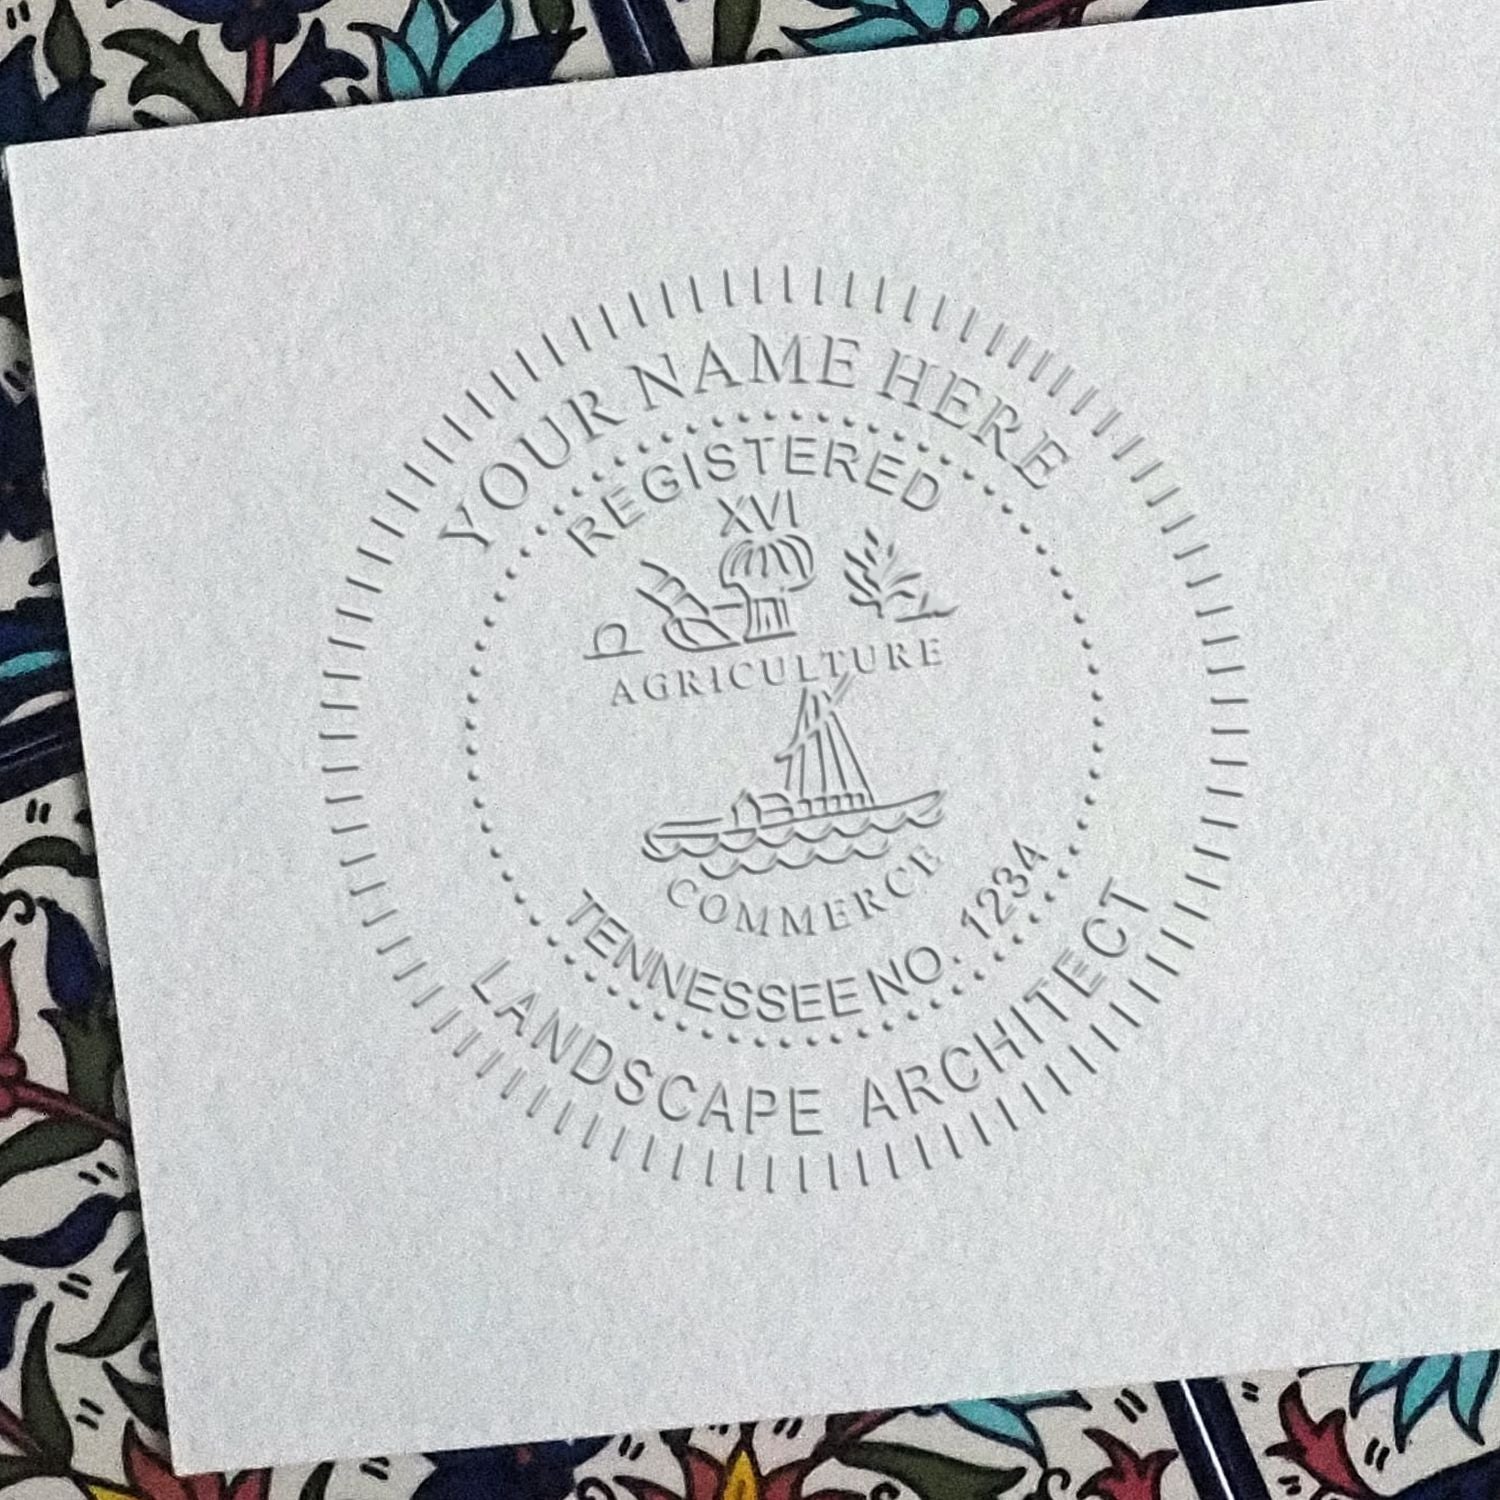 An alternative view of the Tennessee Long Reach Landscape Architect Embossing Stamp stamped on a sheet of paper showing the image in use